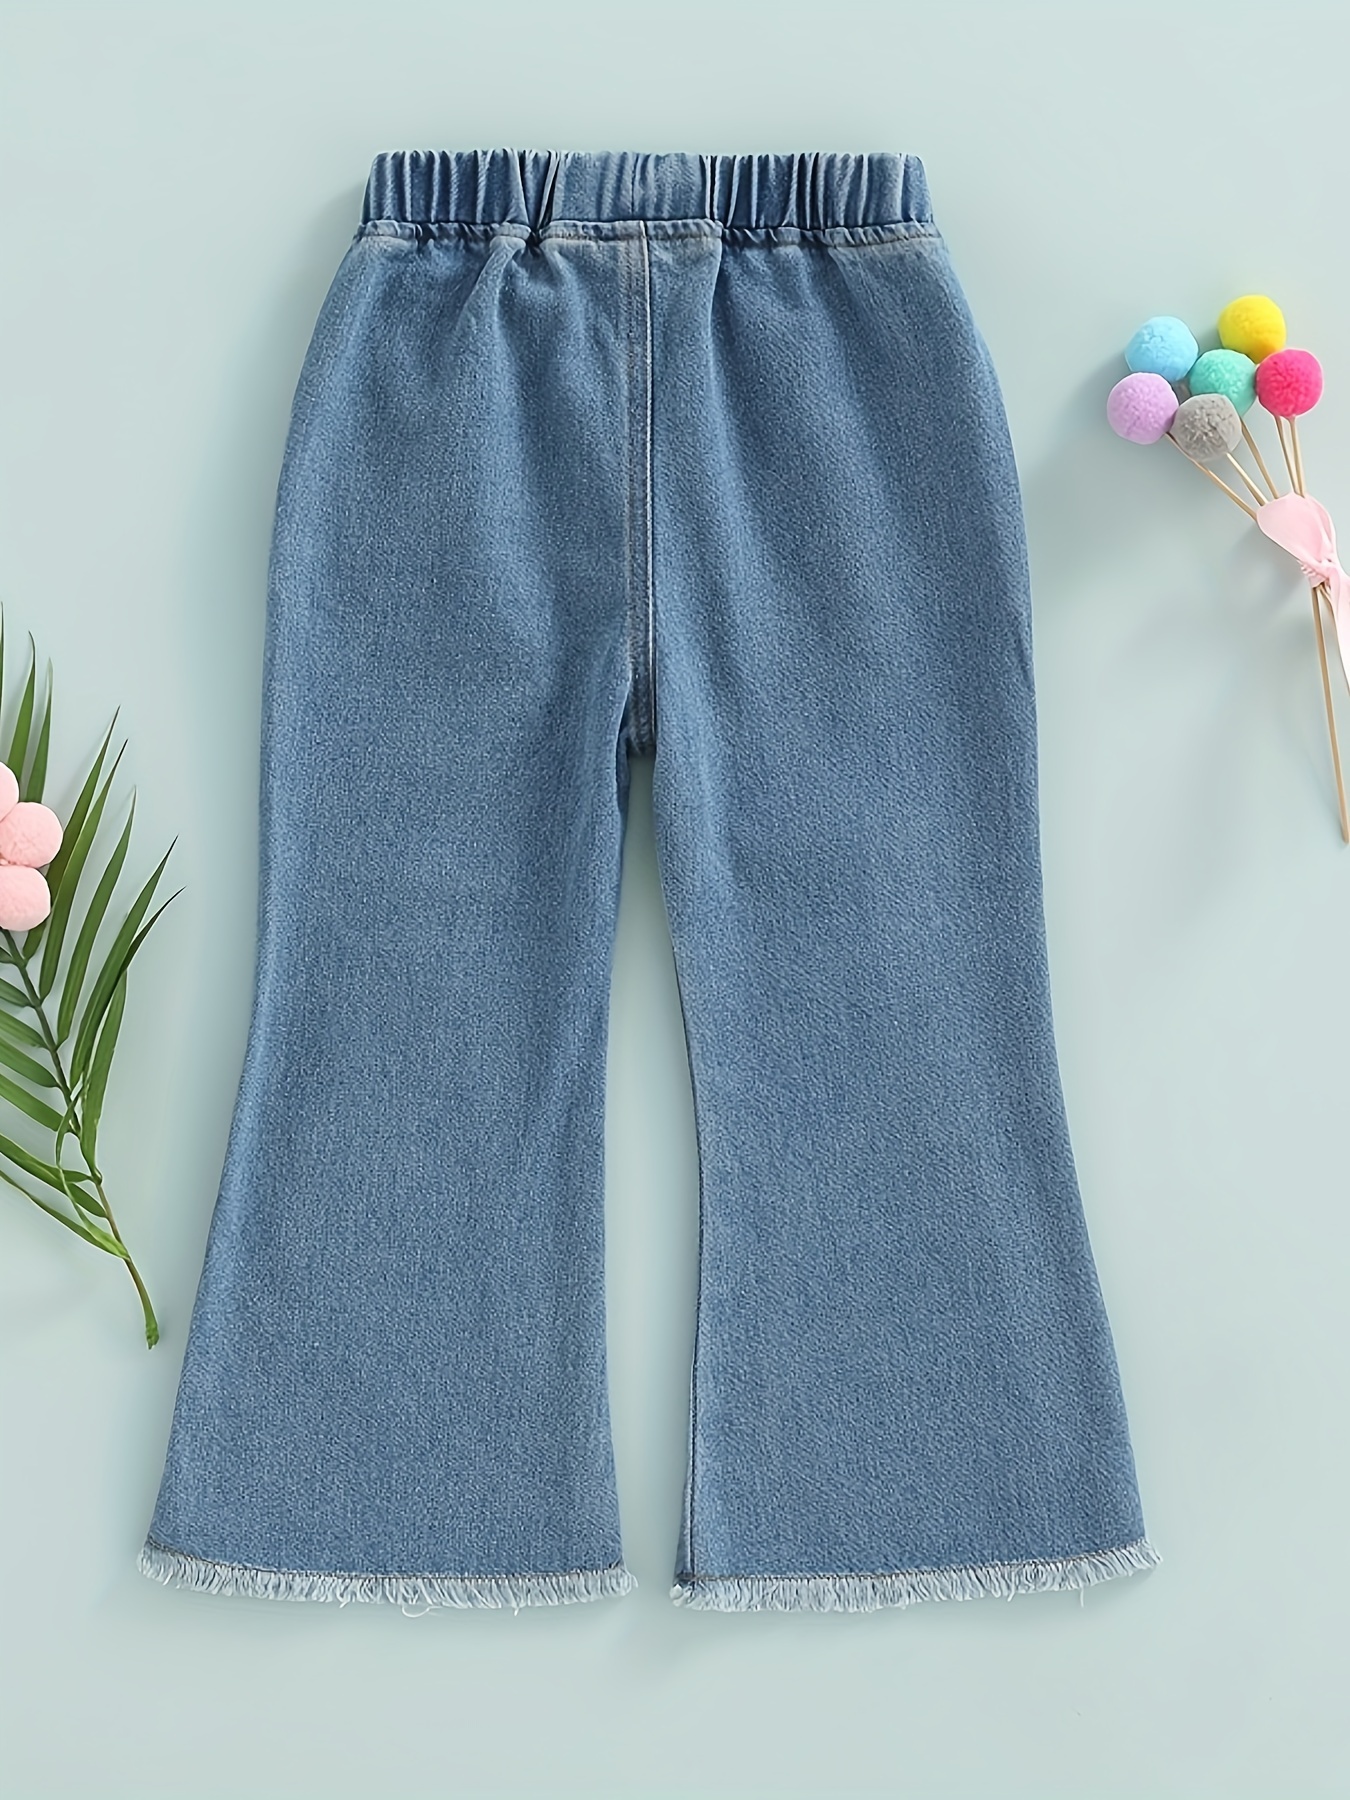 Girl's Bell Bottom Loose Fit Stretchable Denim Jeans